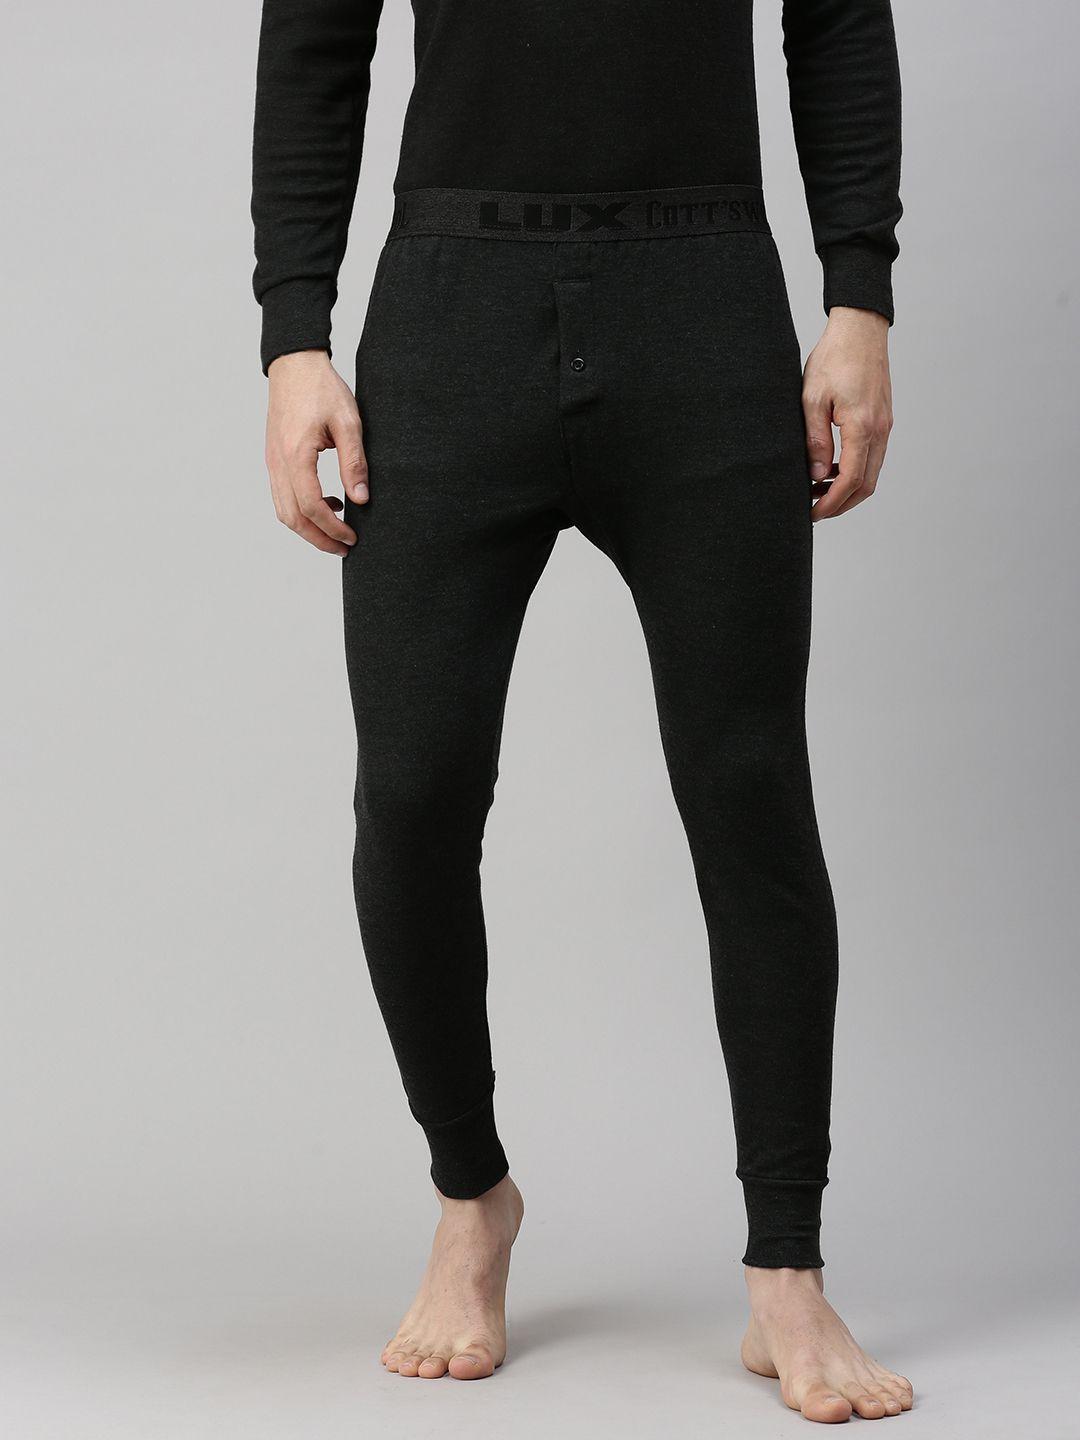 lux-cottswool-men-black-solid-cotton-thermal-bottoms